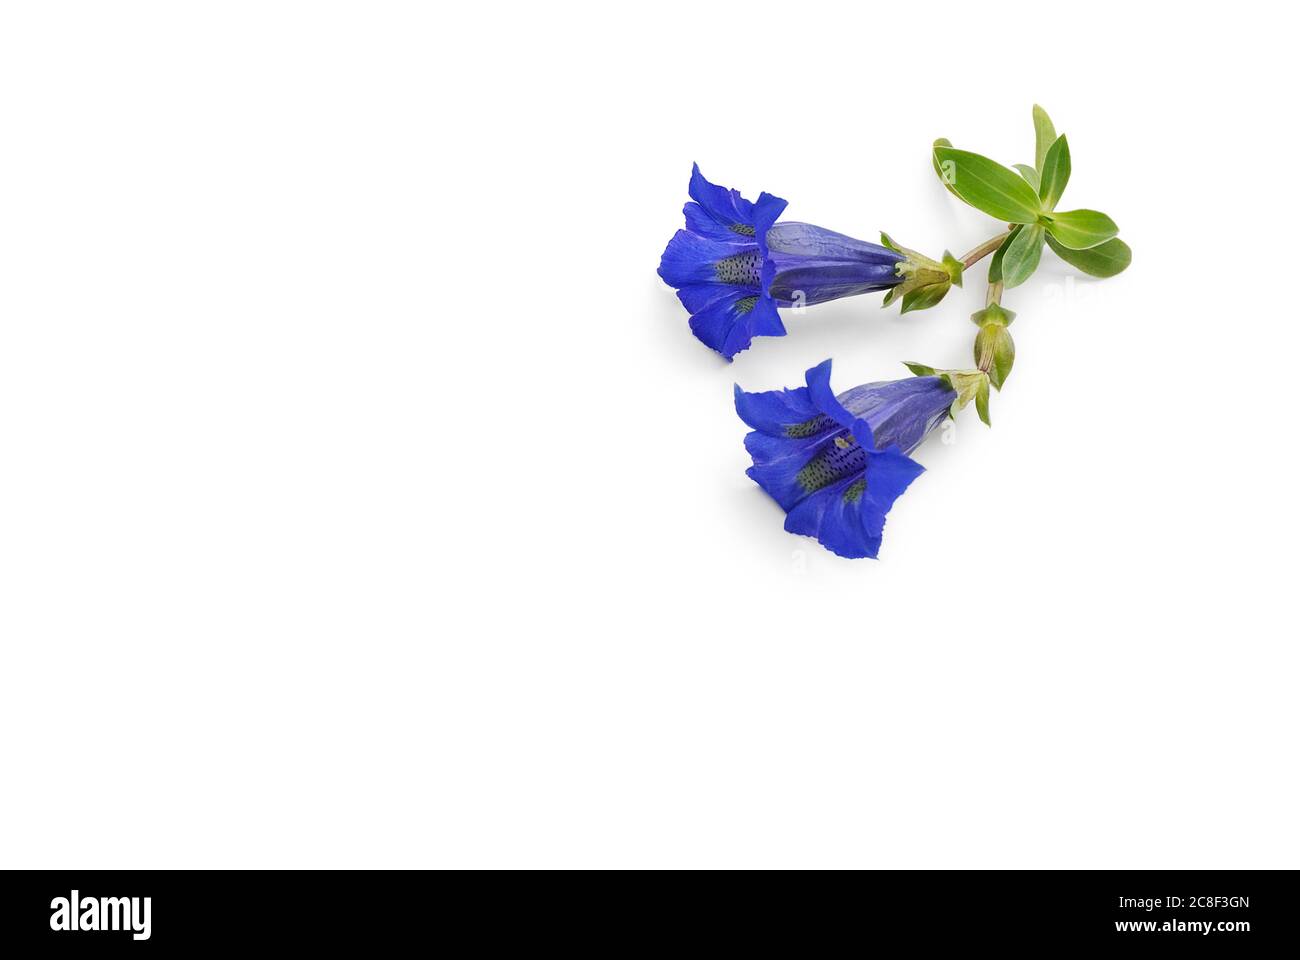 Blue gentian lies on white background Stock Photo